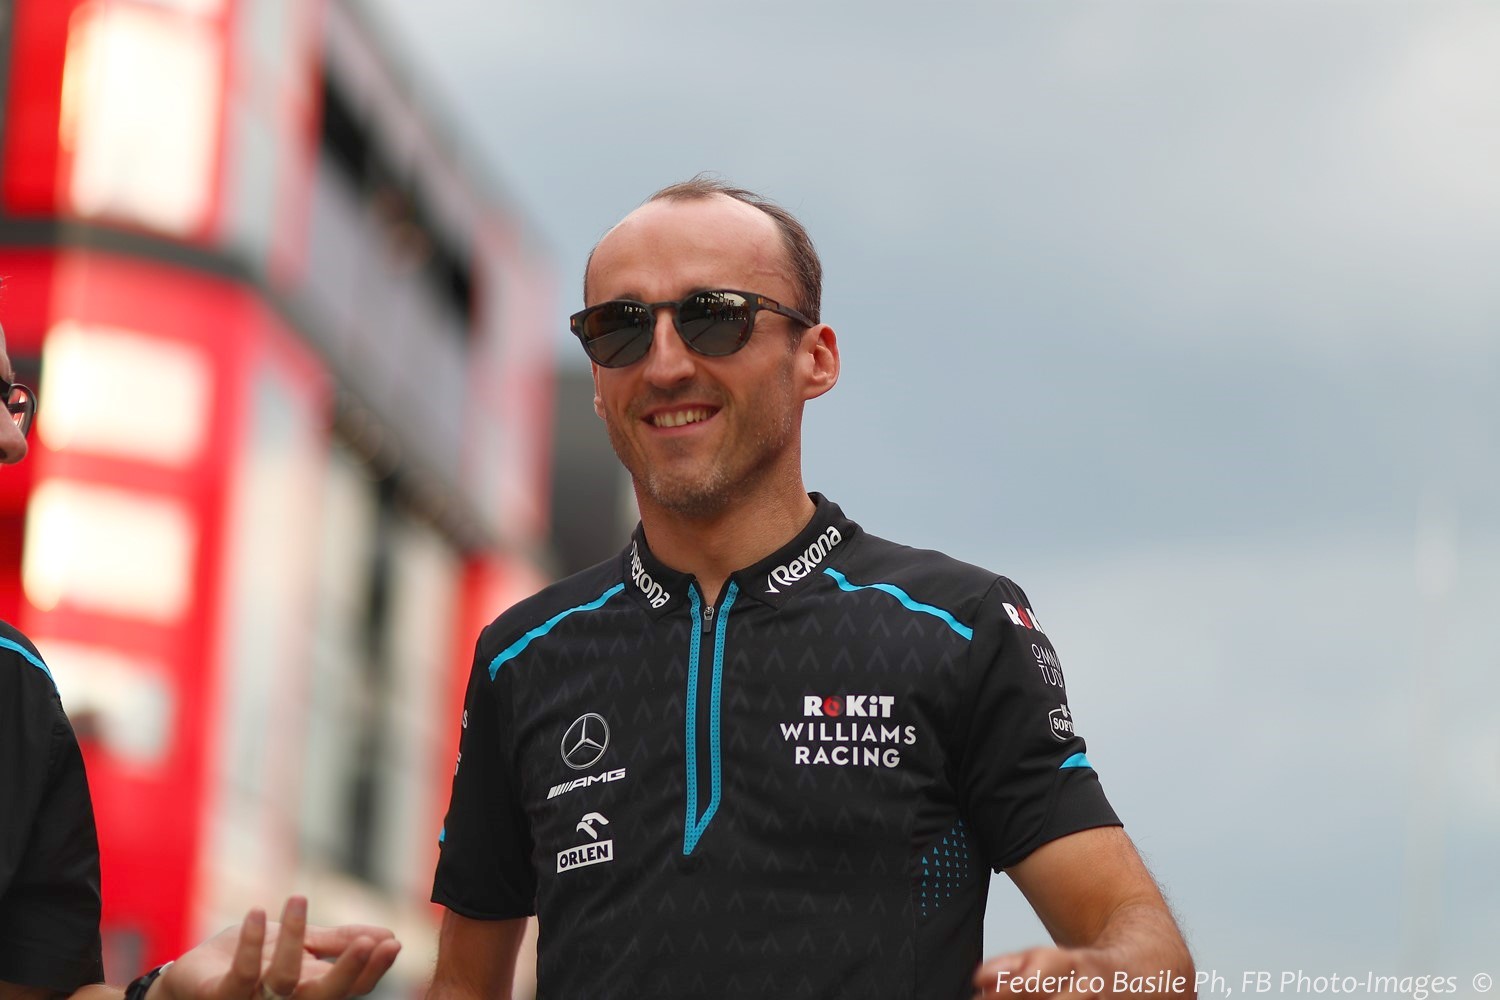 Robert Kubica in Hungary Sunday has been getting his lunch eaten by George Russell